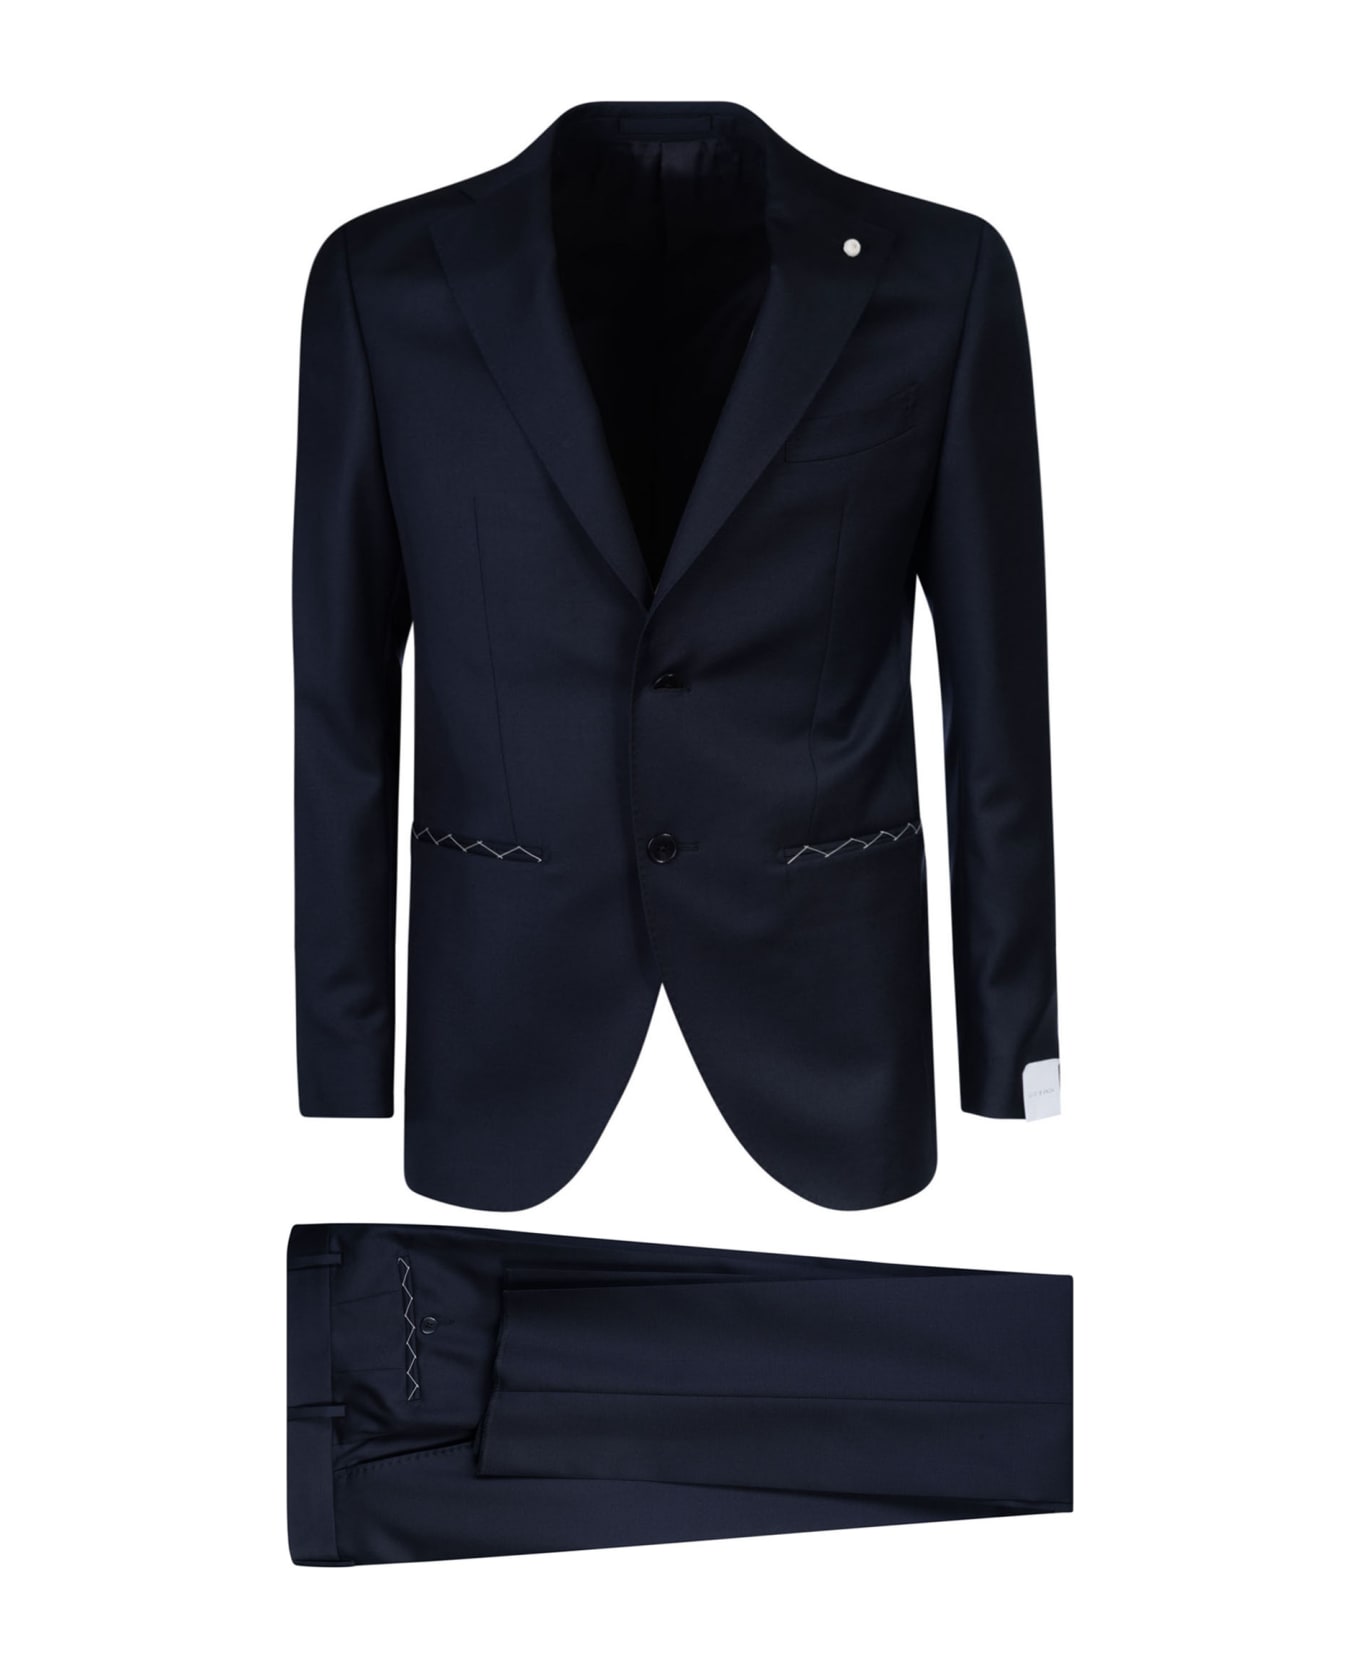 Luigi Bianchi Mantova Two-button Fitted Suit - C スーツ